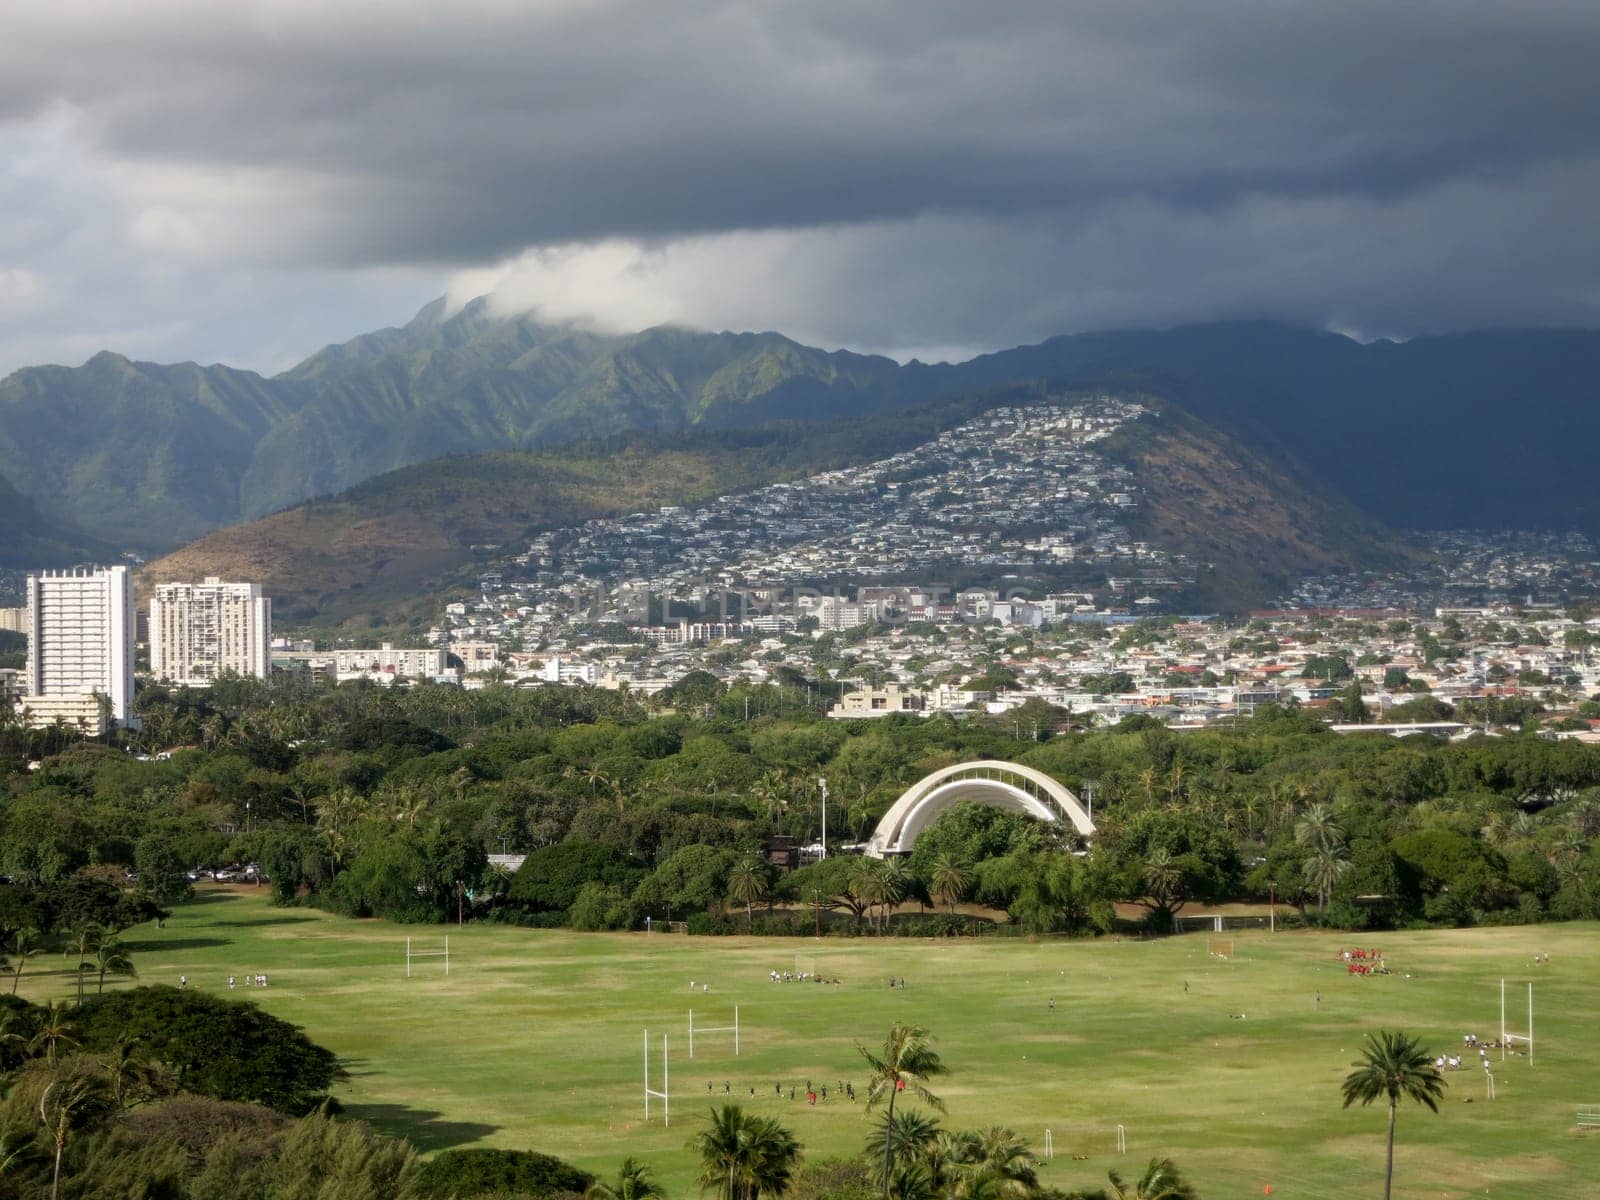 Aerial view of Kapiolani Park in Honolulu, Hawaii with mountains in the background.